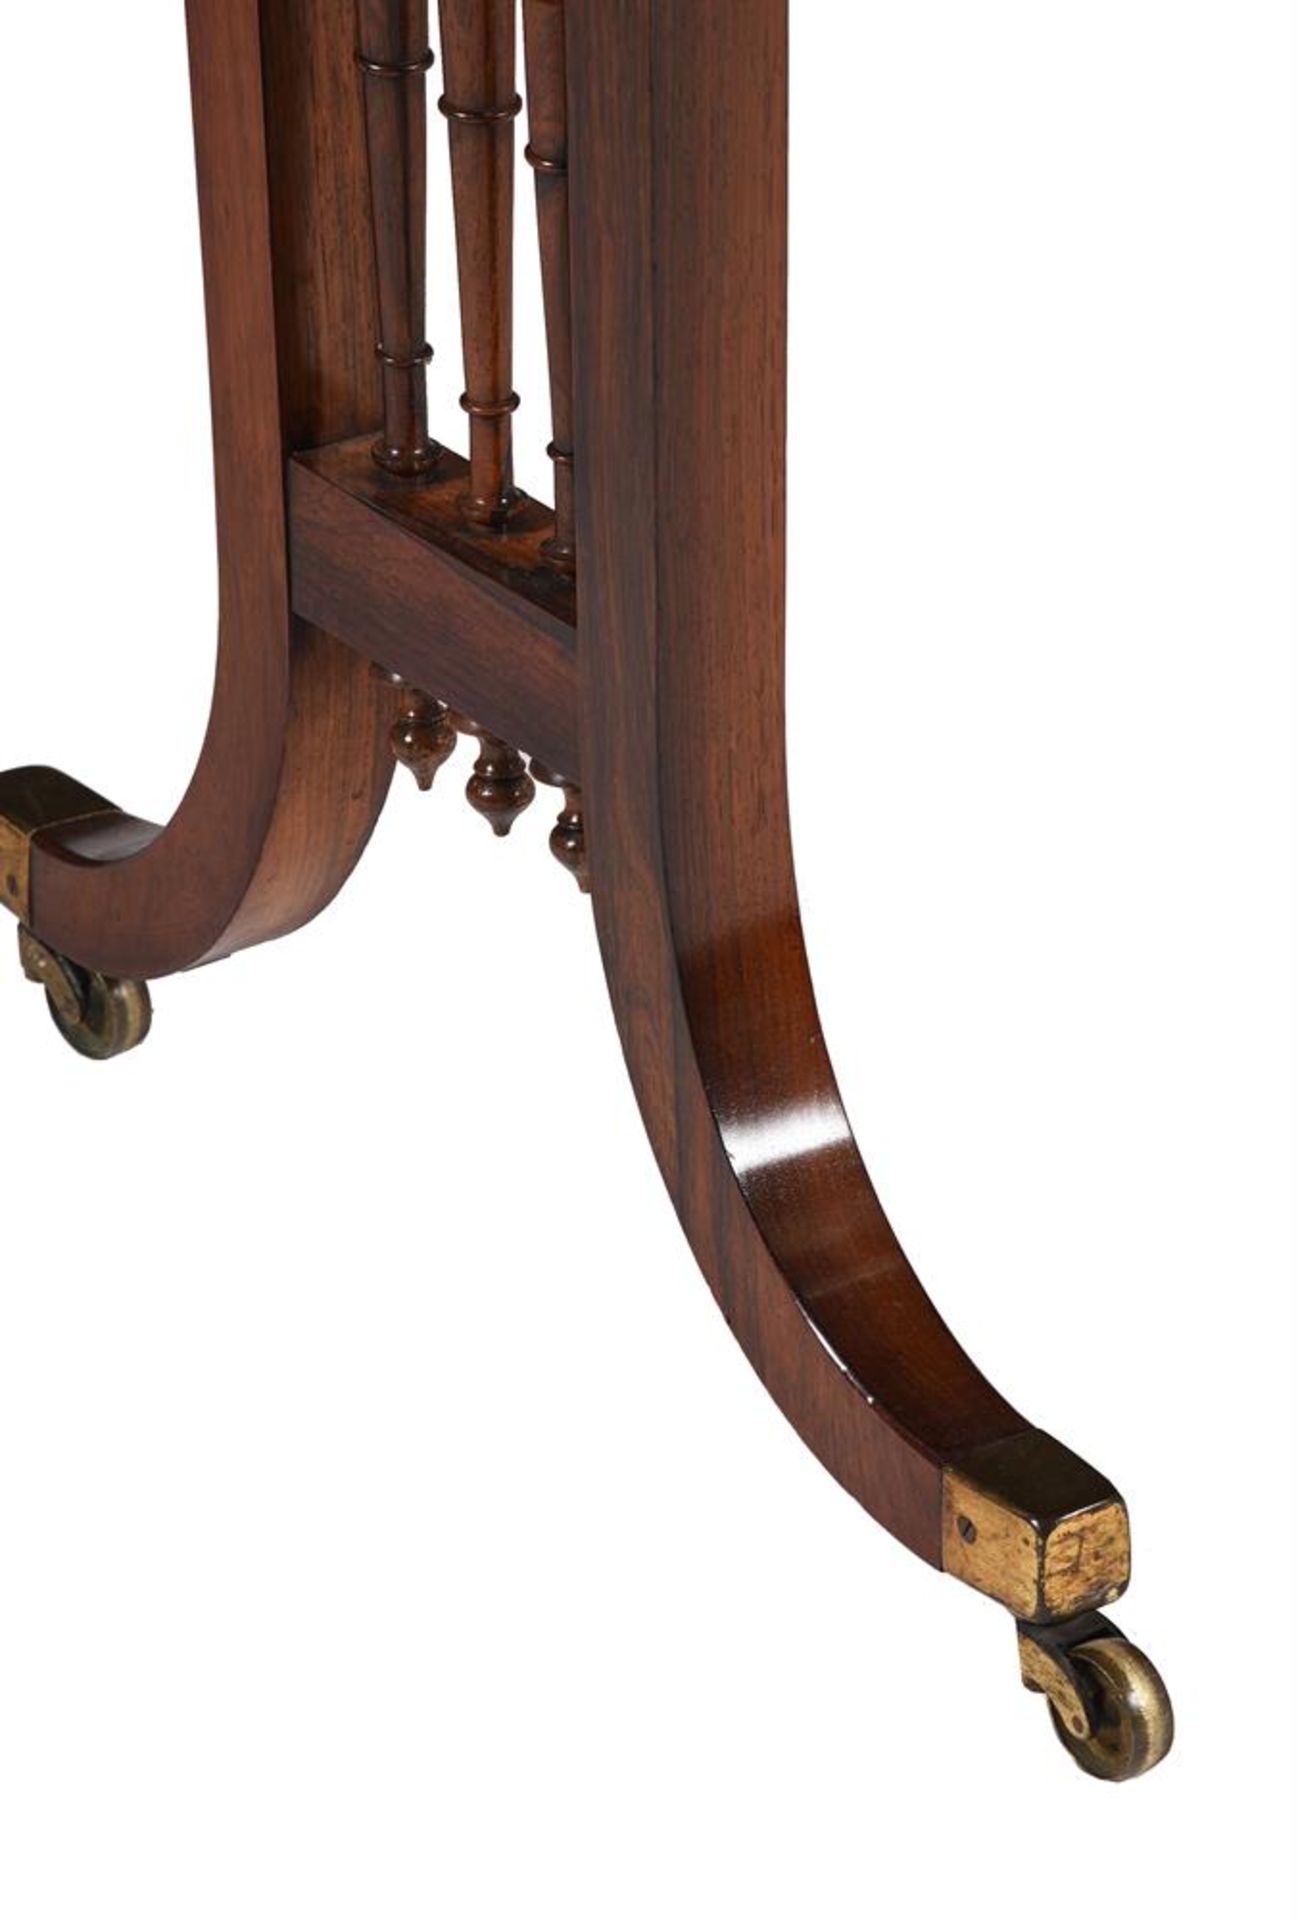 Y A REGENCY ROSEWOOD LIBRARY TABLE, ATTRIBUTED TO GILLOWS, CIRCA 1815 - Image 3 of 4